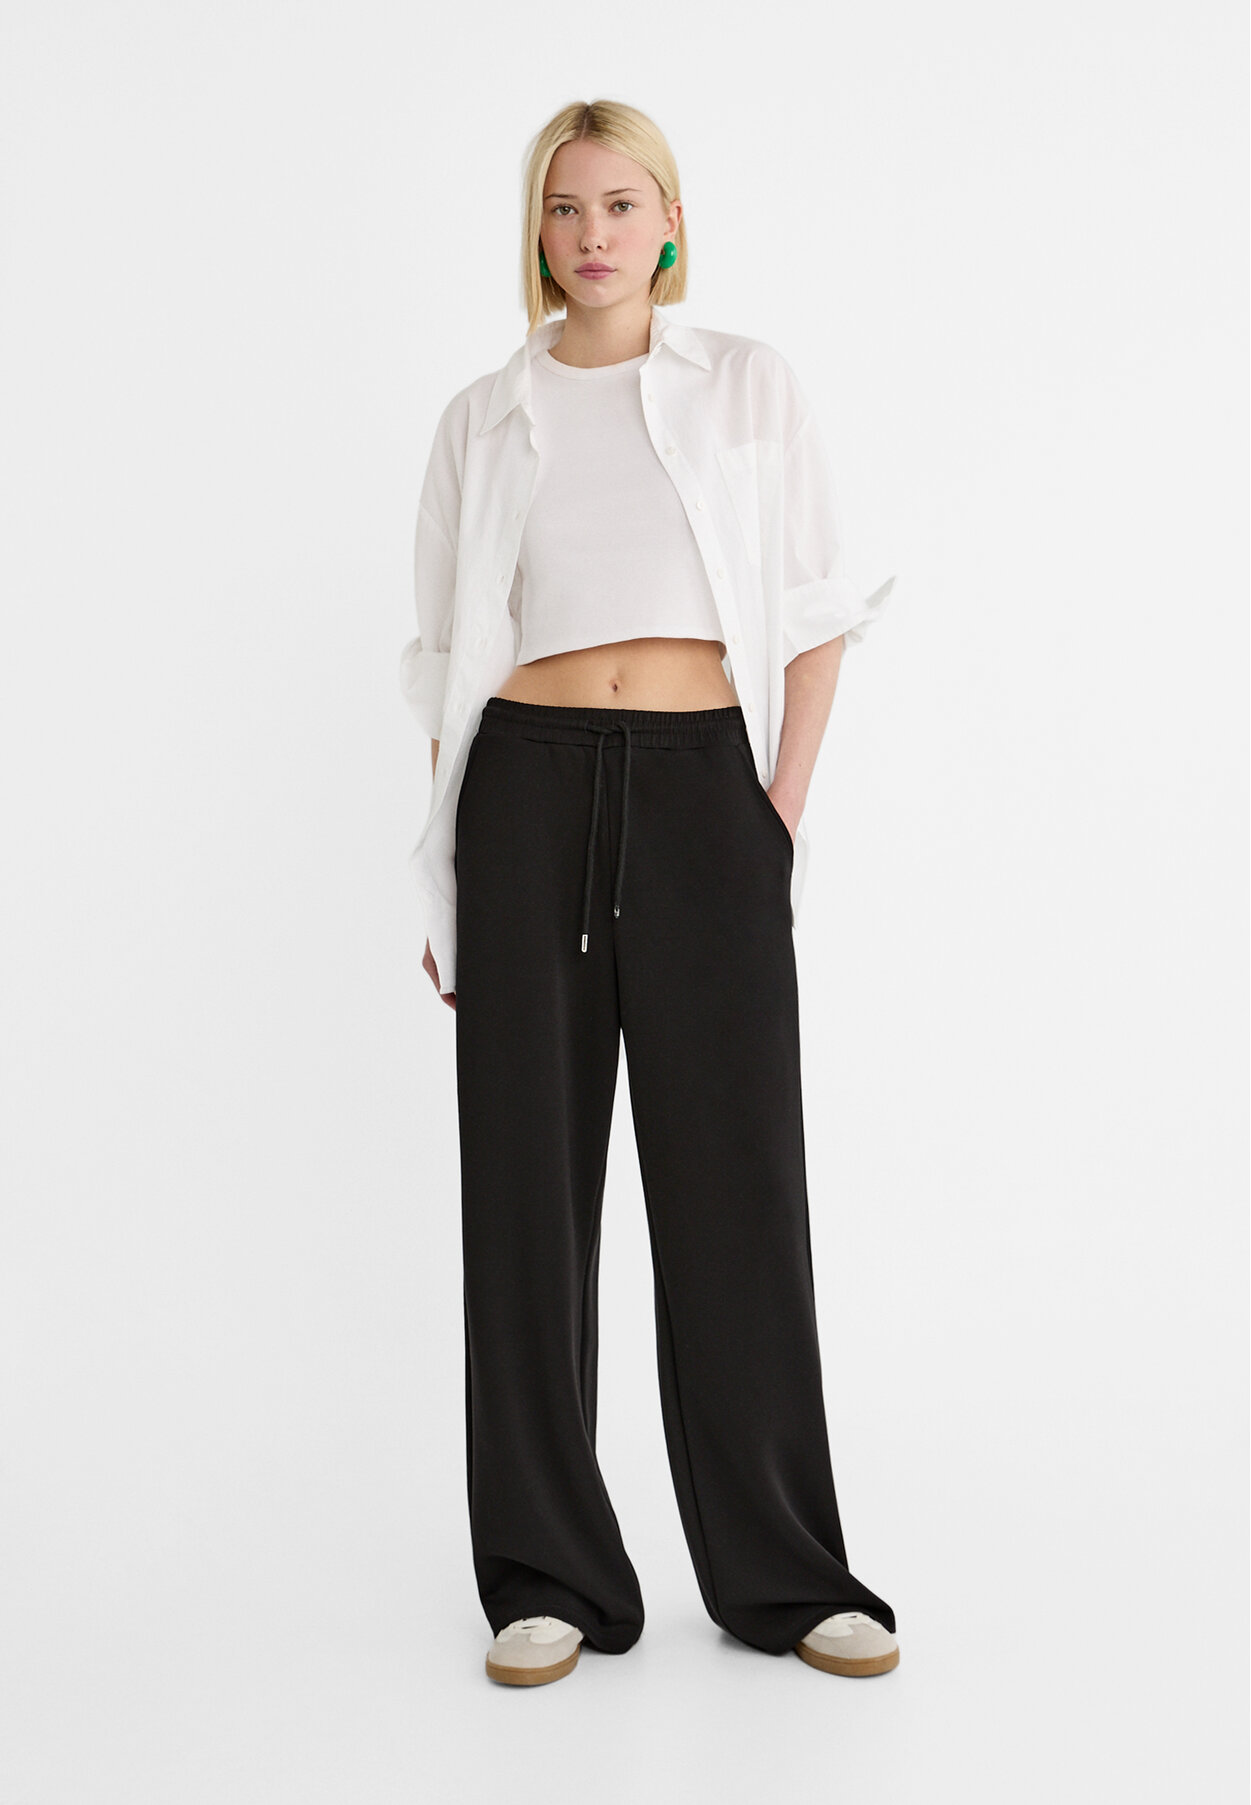 Stradivarius Try On Haul March 2021, Seamless Comfort Collection